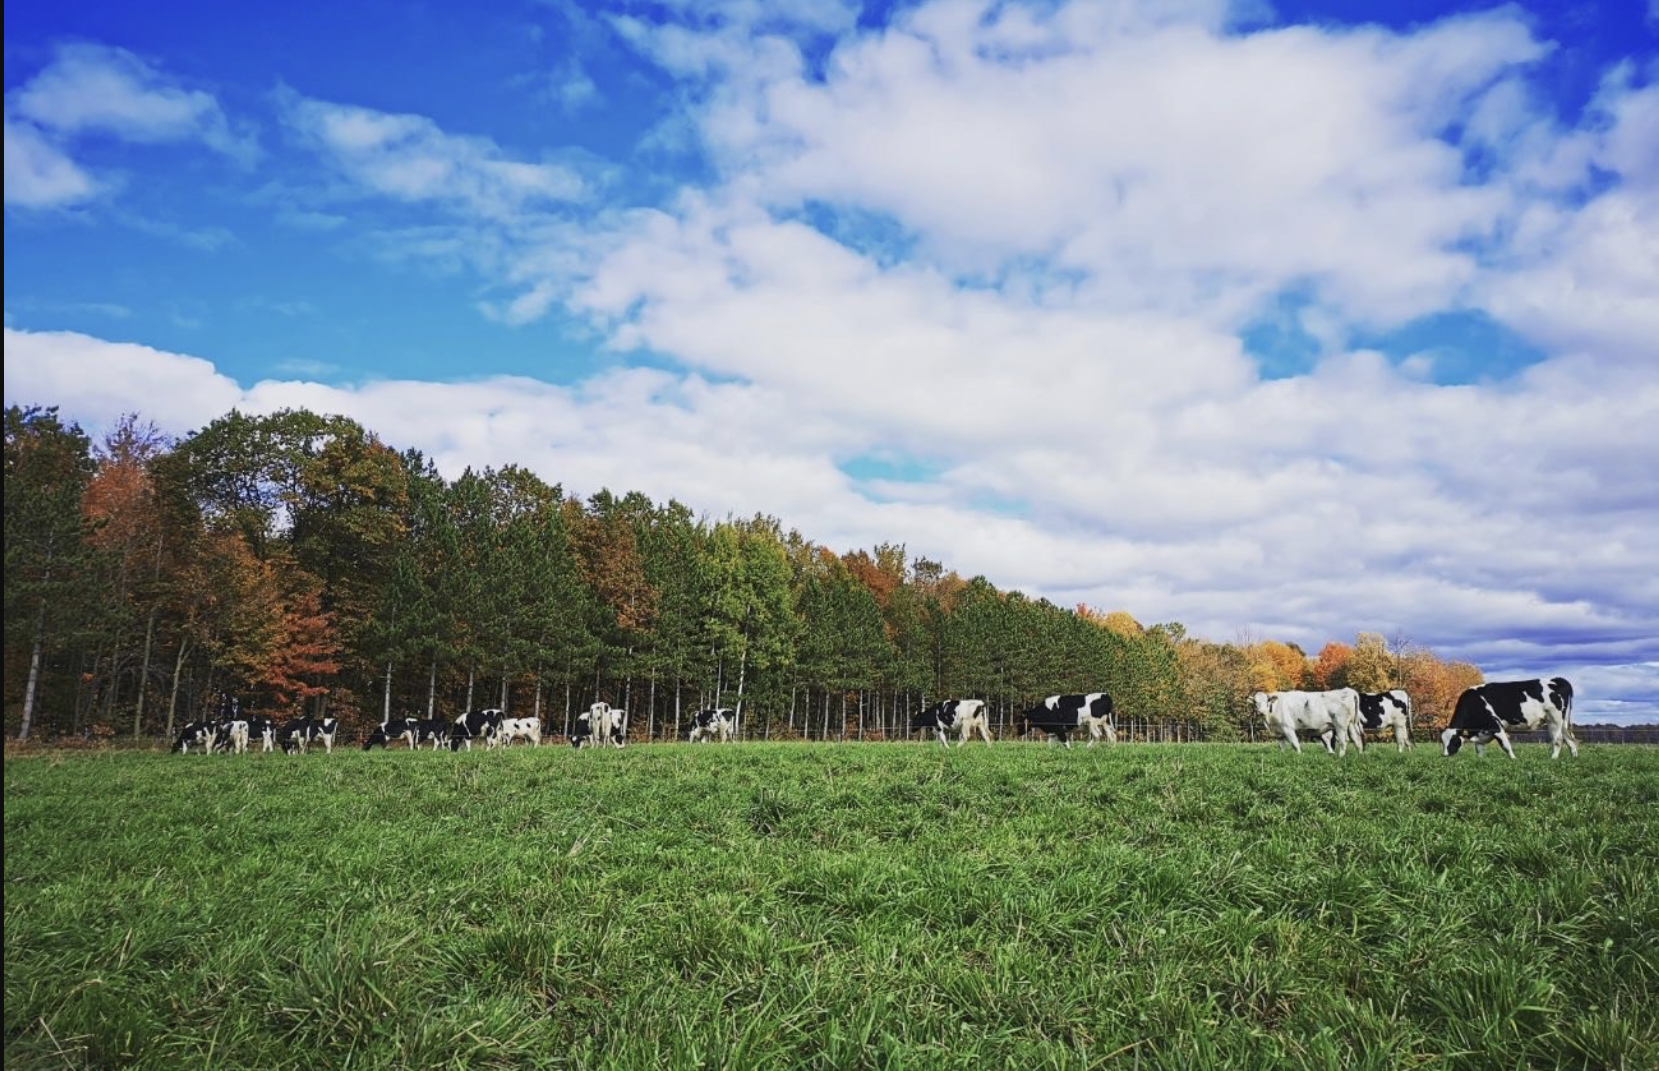 Cows grazing. (Photo by Brooke Bembeneck)